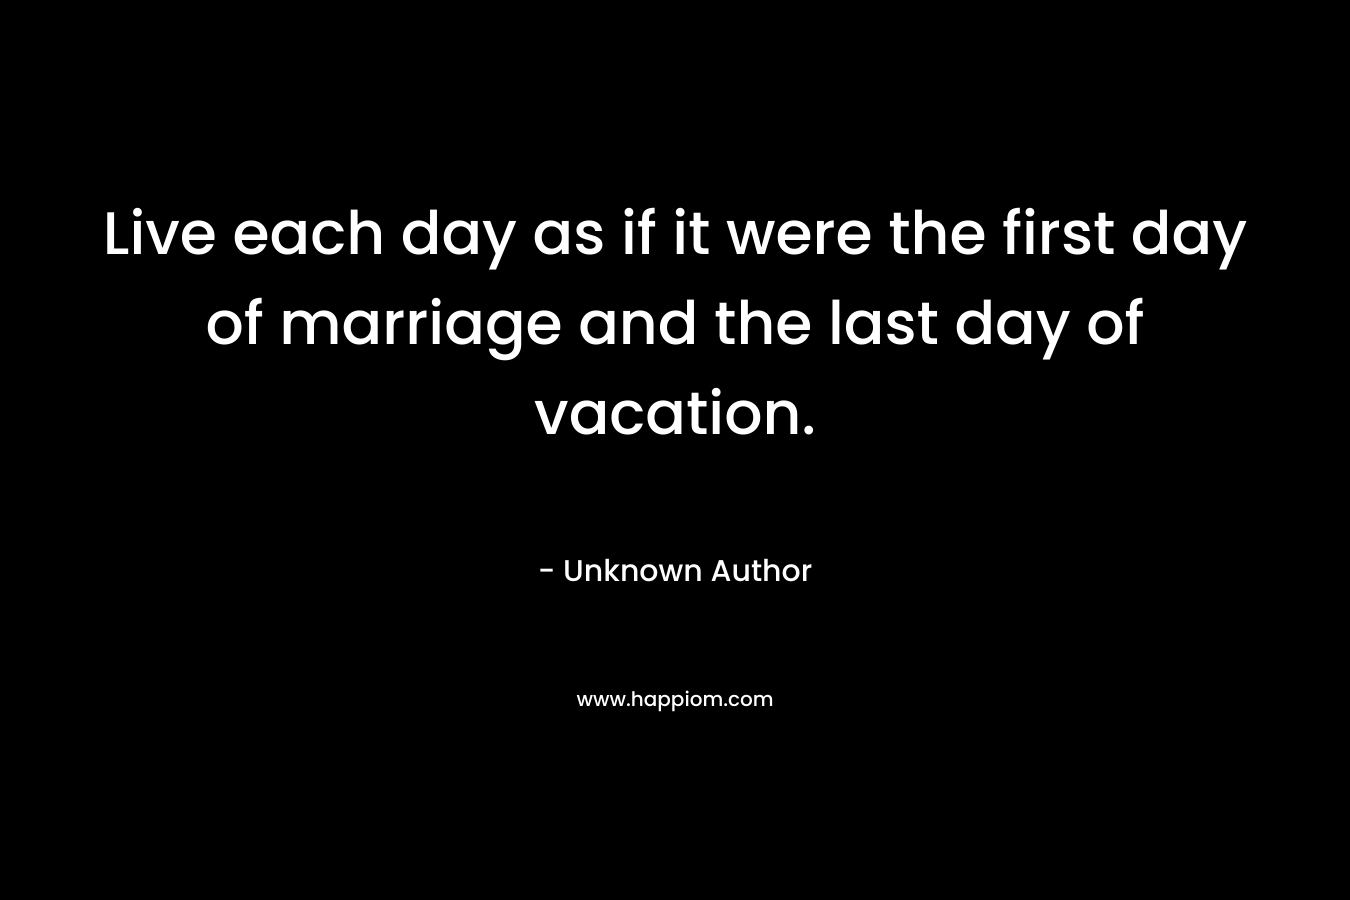 Live each day as if it were the first day of marriage and the last day of vacation.